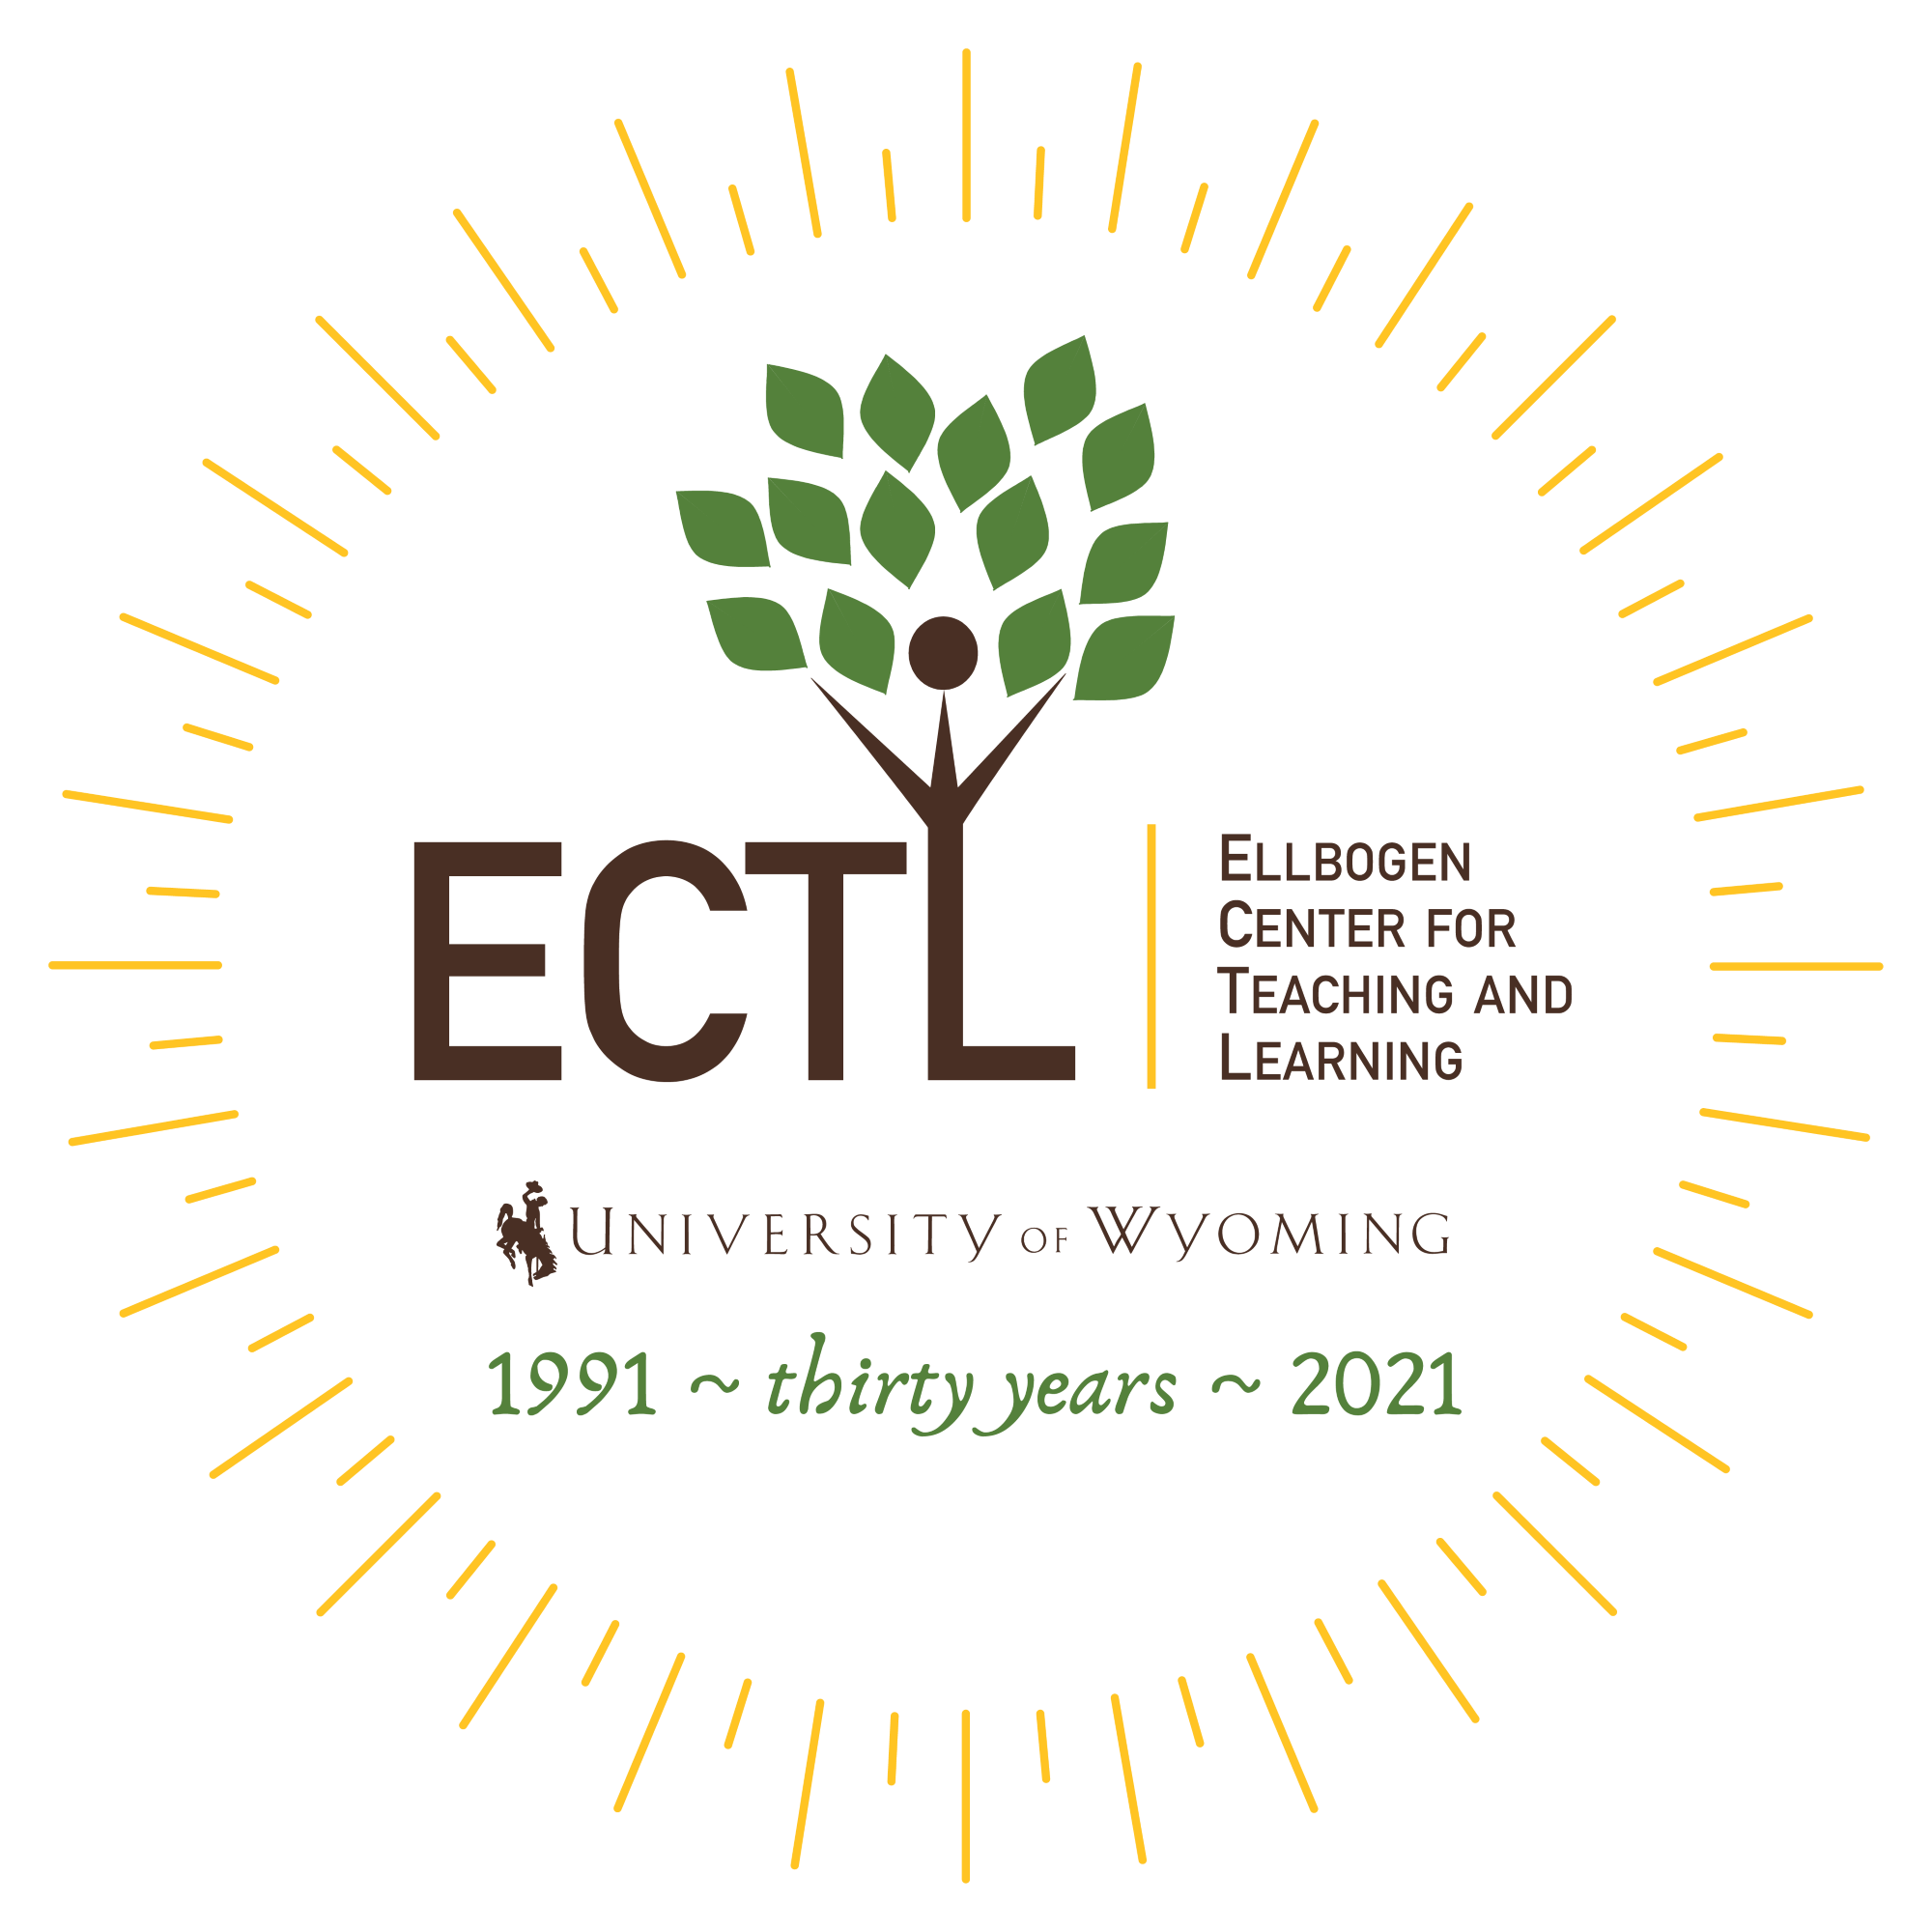 ECTL's 30th anniversary logo. Ellbogen Center for Teaching and Learning.